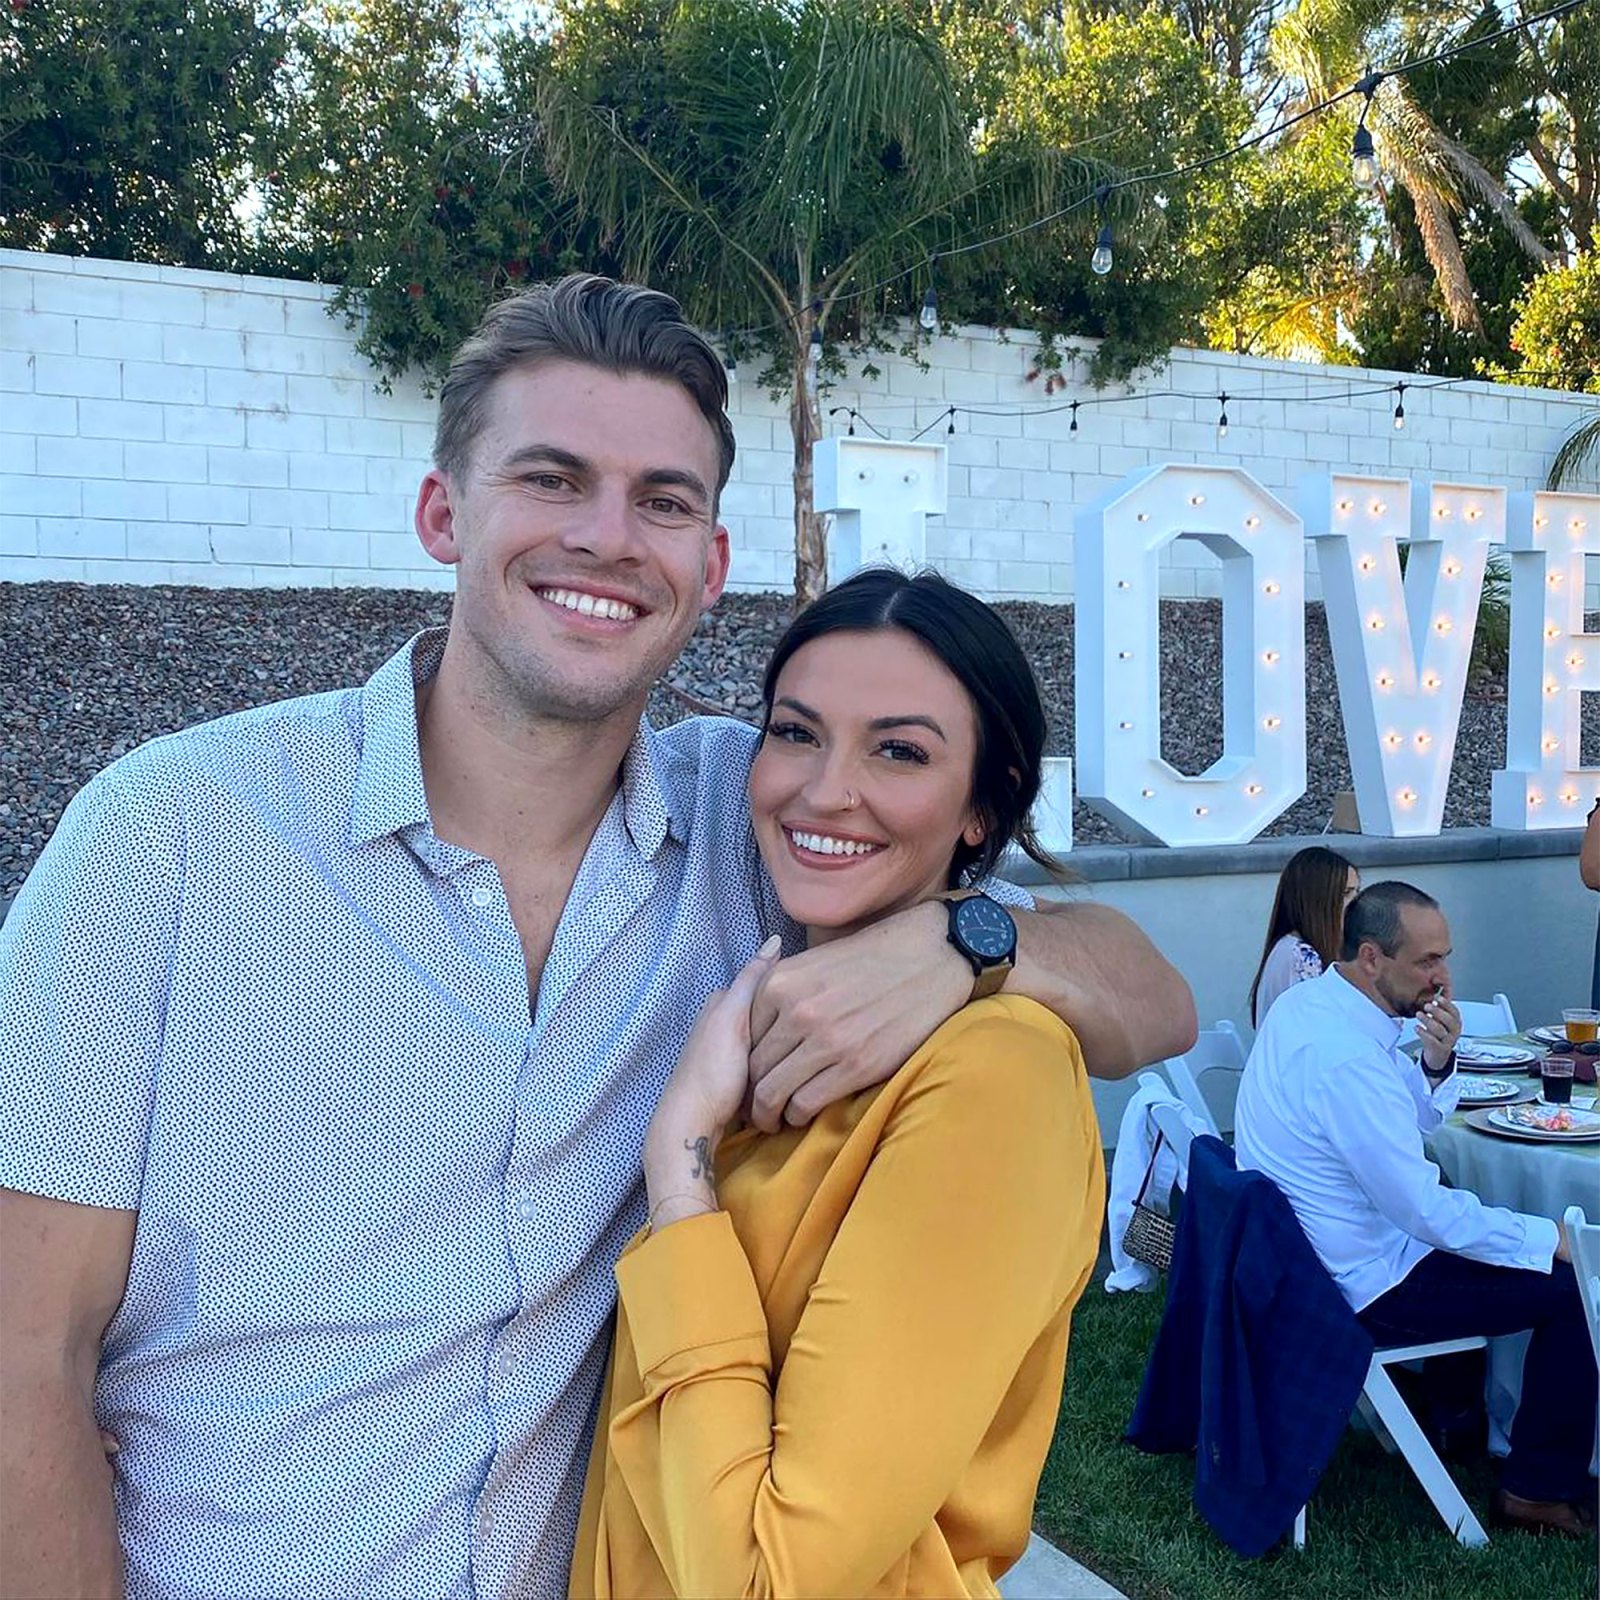 Tia Booth Has a Boyfriend After Leaving 'Bachelor in Paradise' Solo